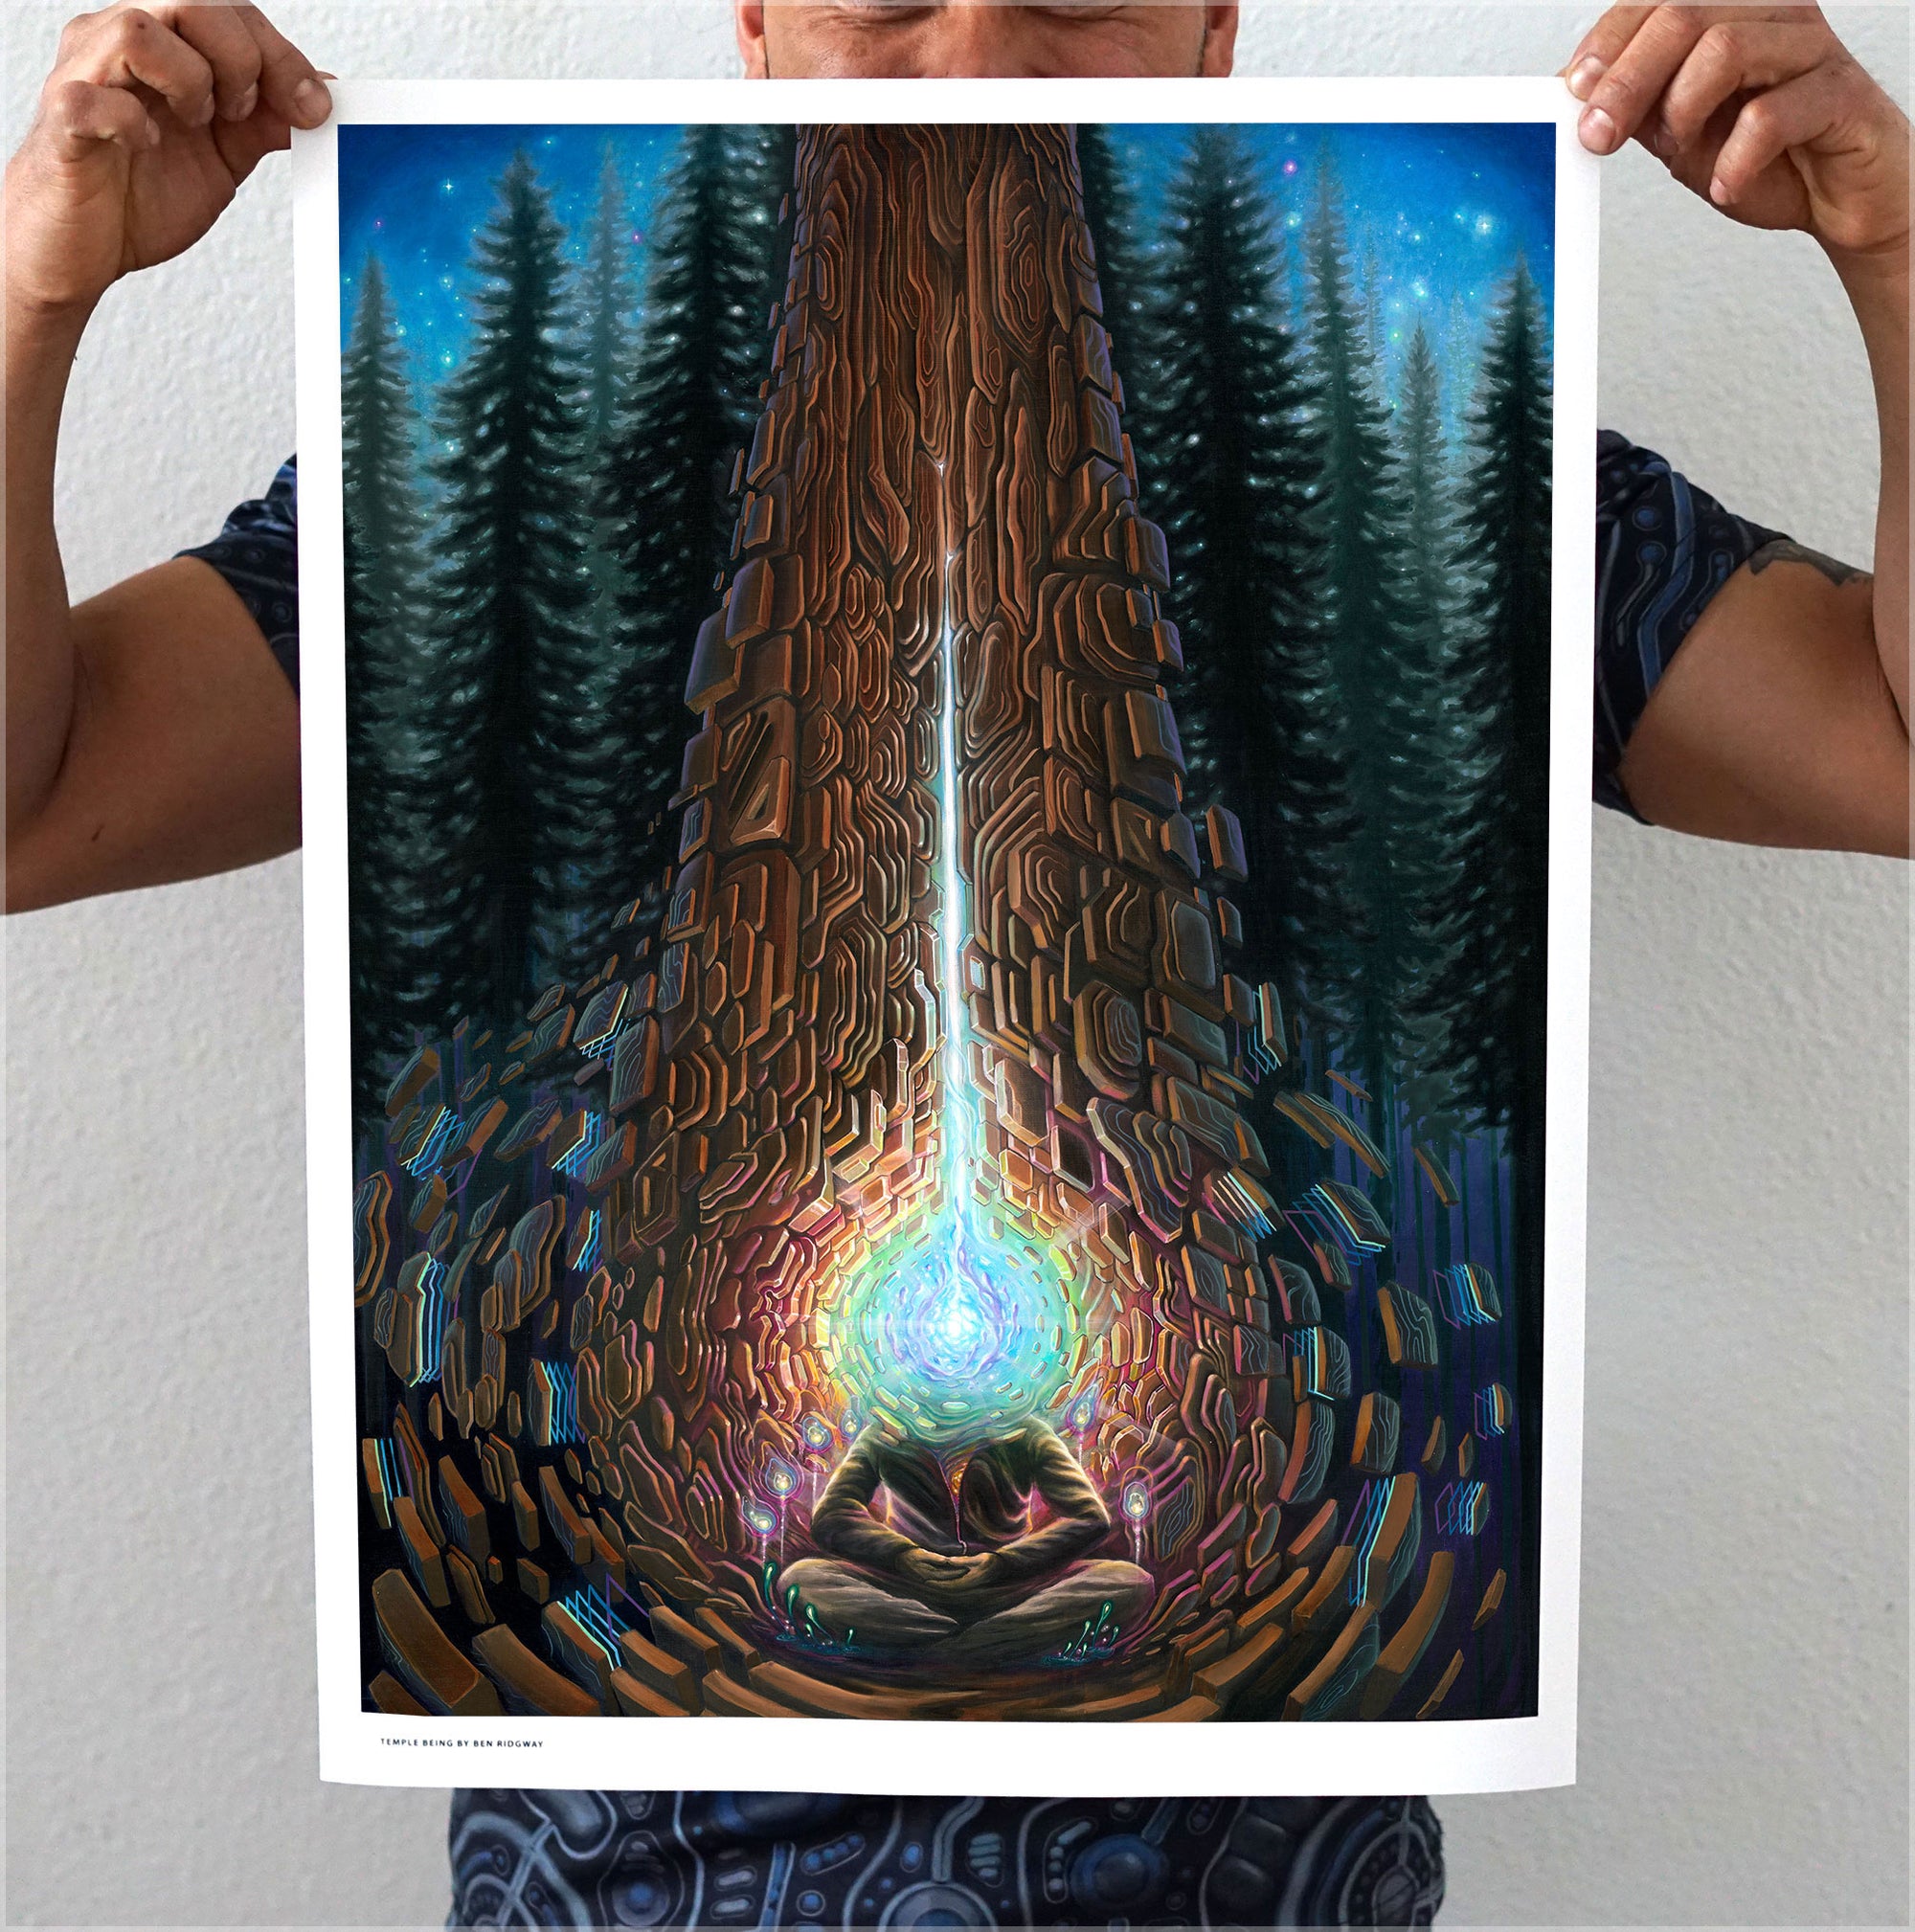 Closer To The Core Signed Print by Blake Foster x Sean Zenner - 24 Hour Release